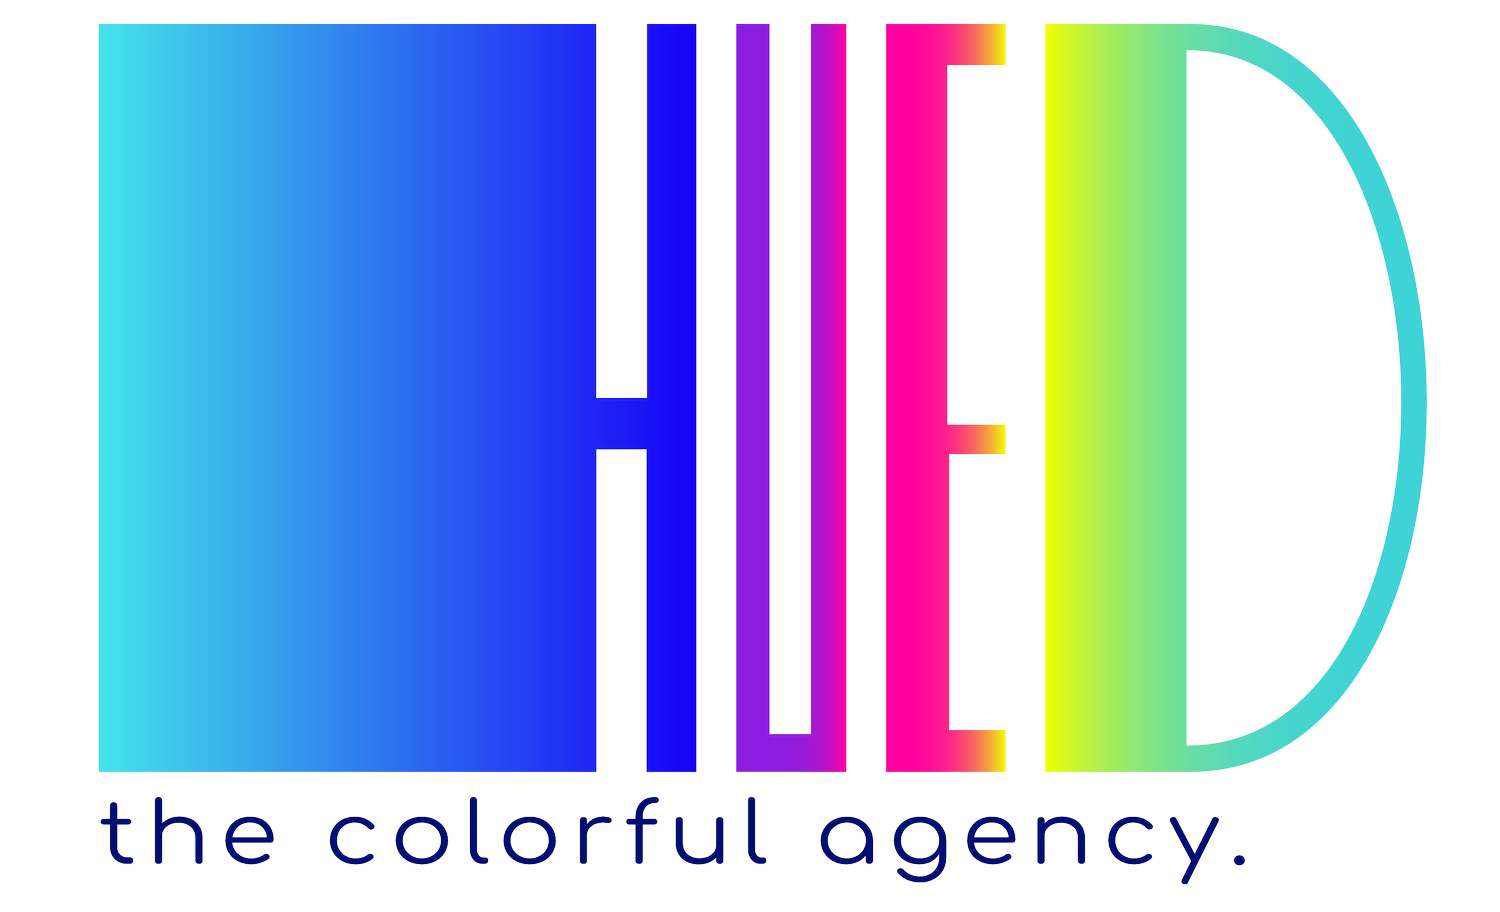 Hued: The Colorful Agency